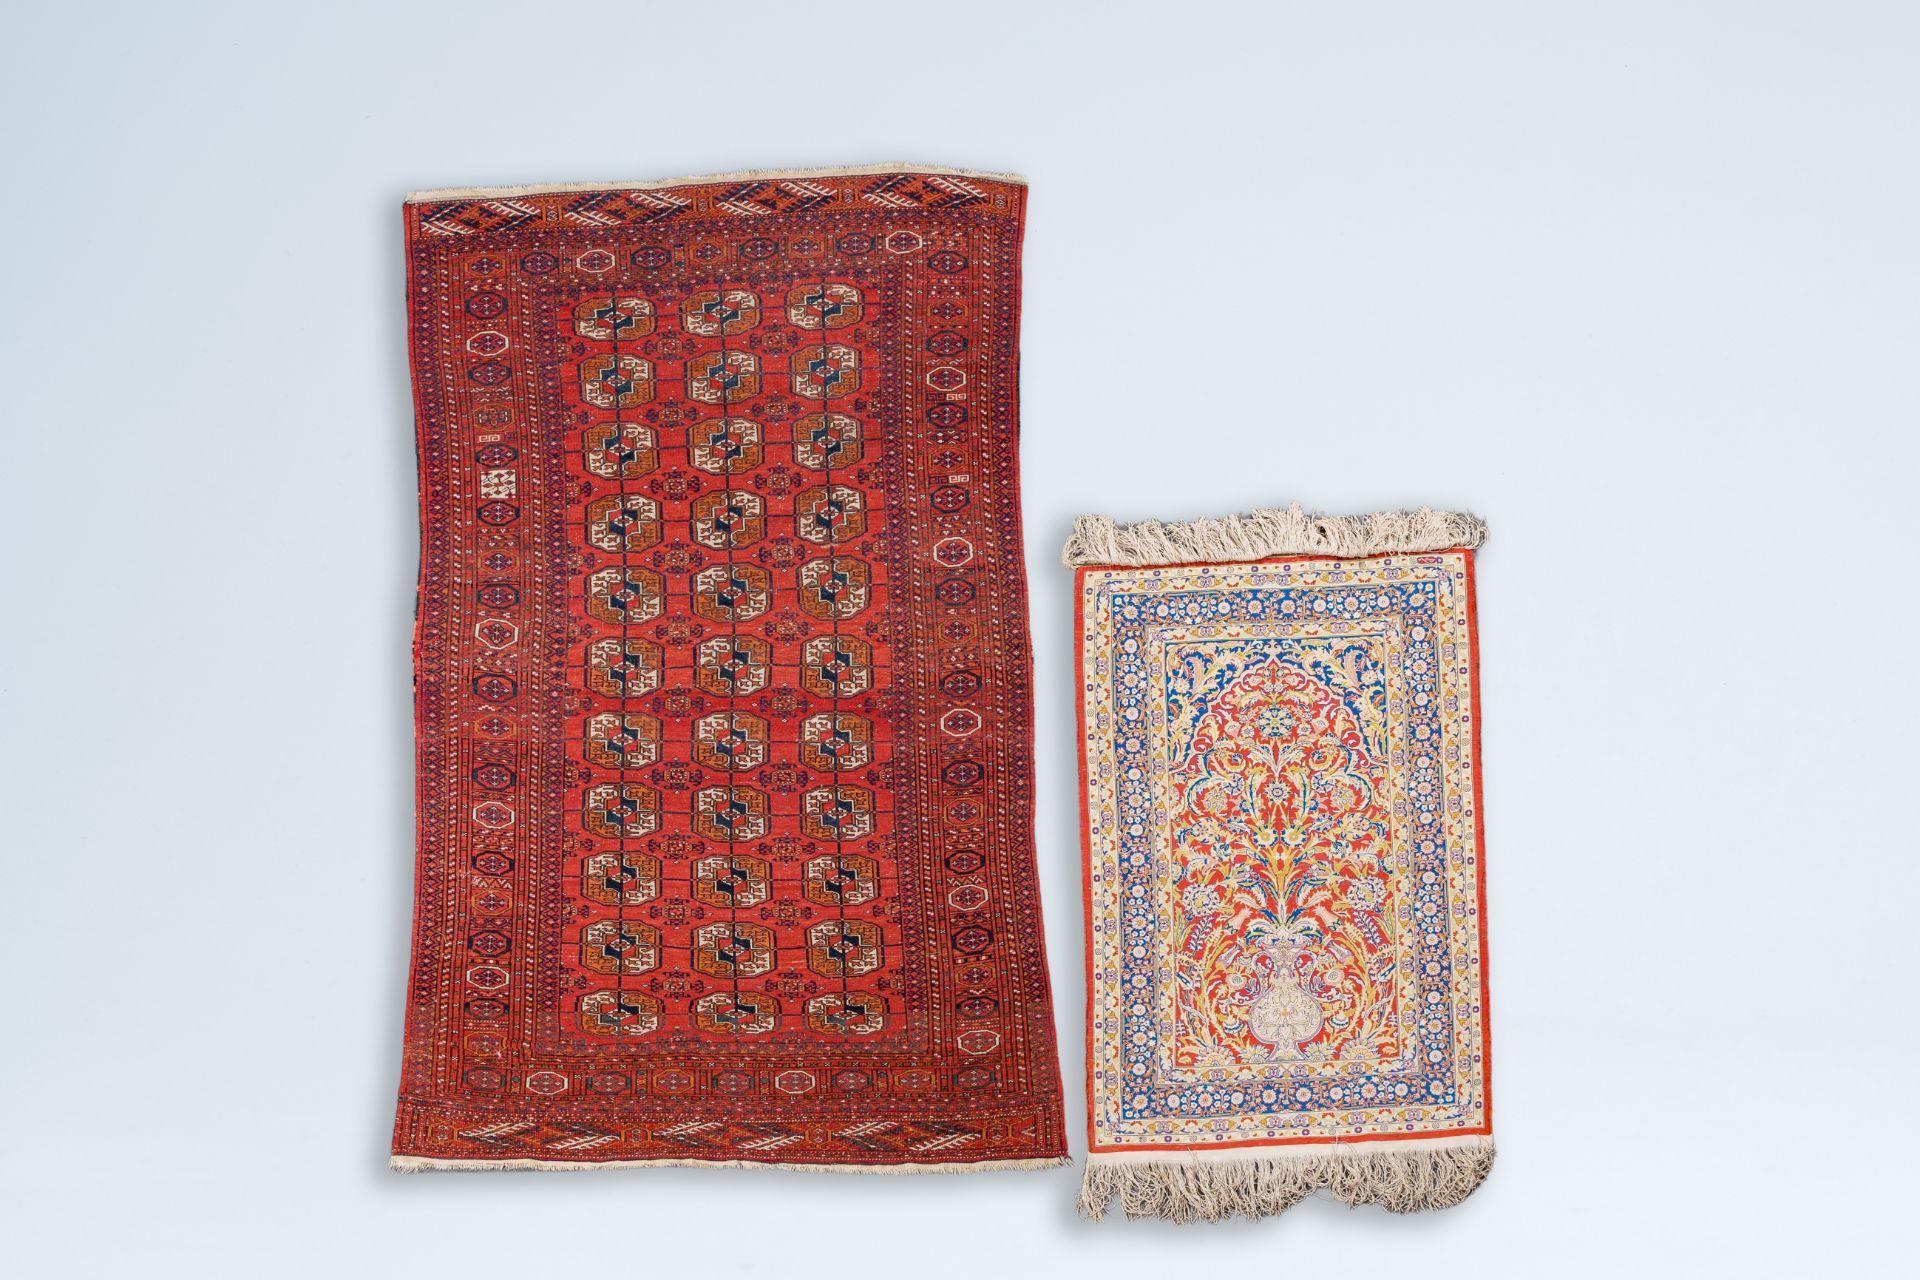 A Turkmen Tekke rug, wool on cotton, and an oriental rug with floral design, silk on cotton, 20th C. - Image 2 of 4